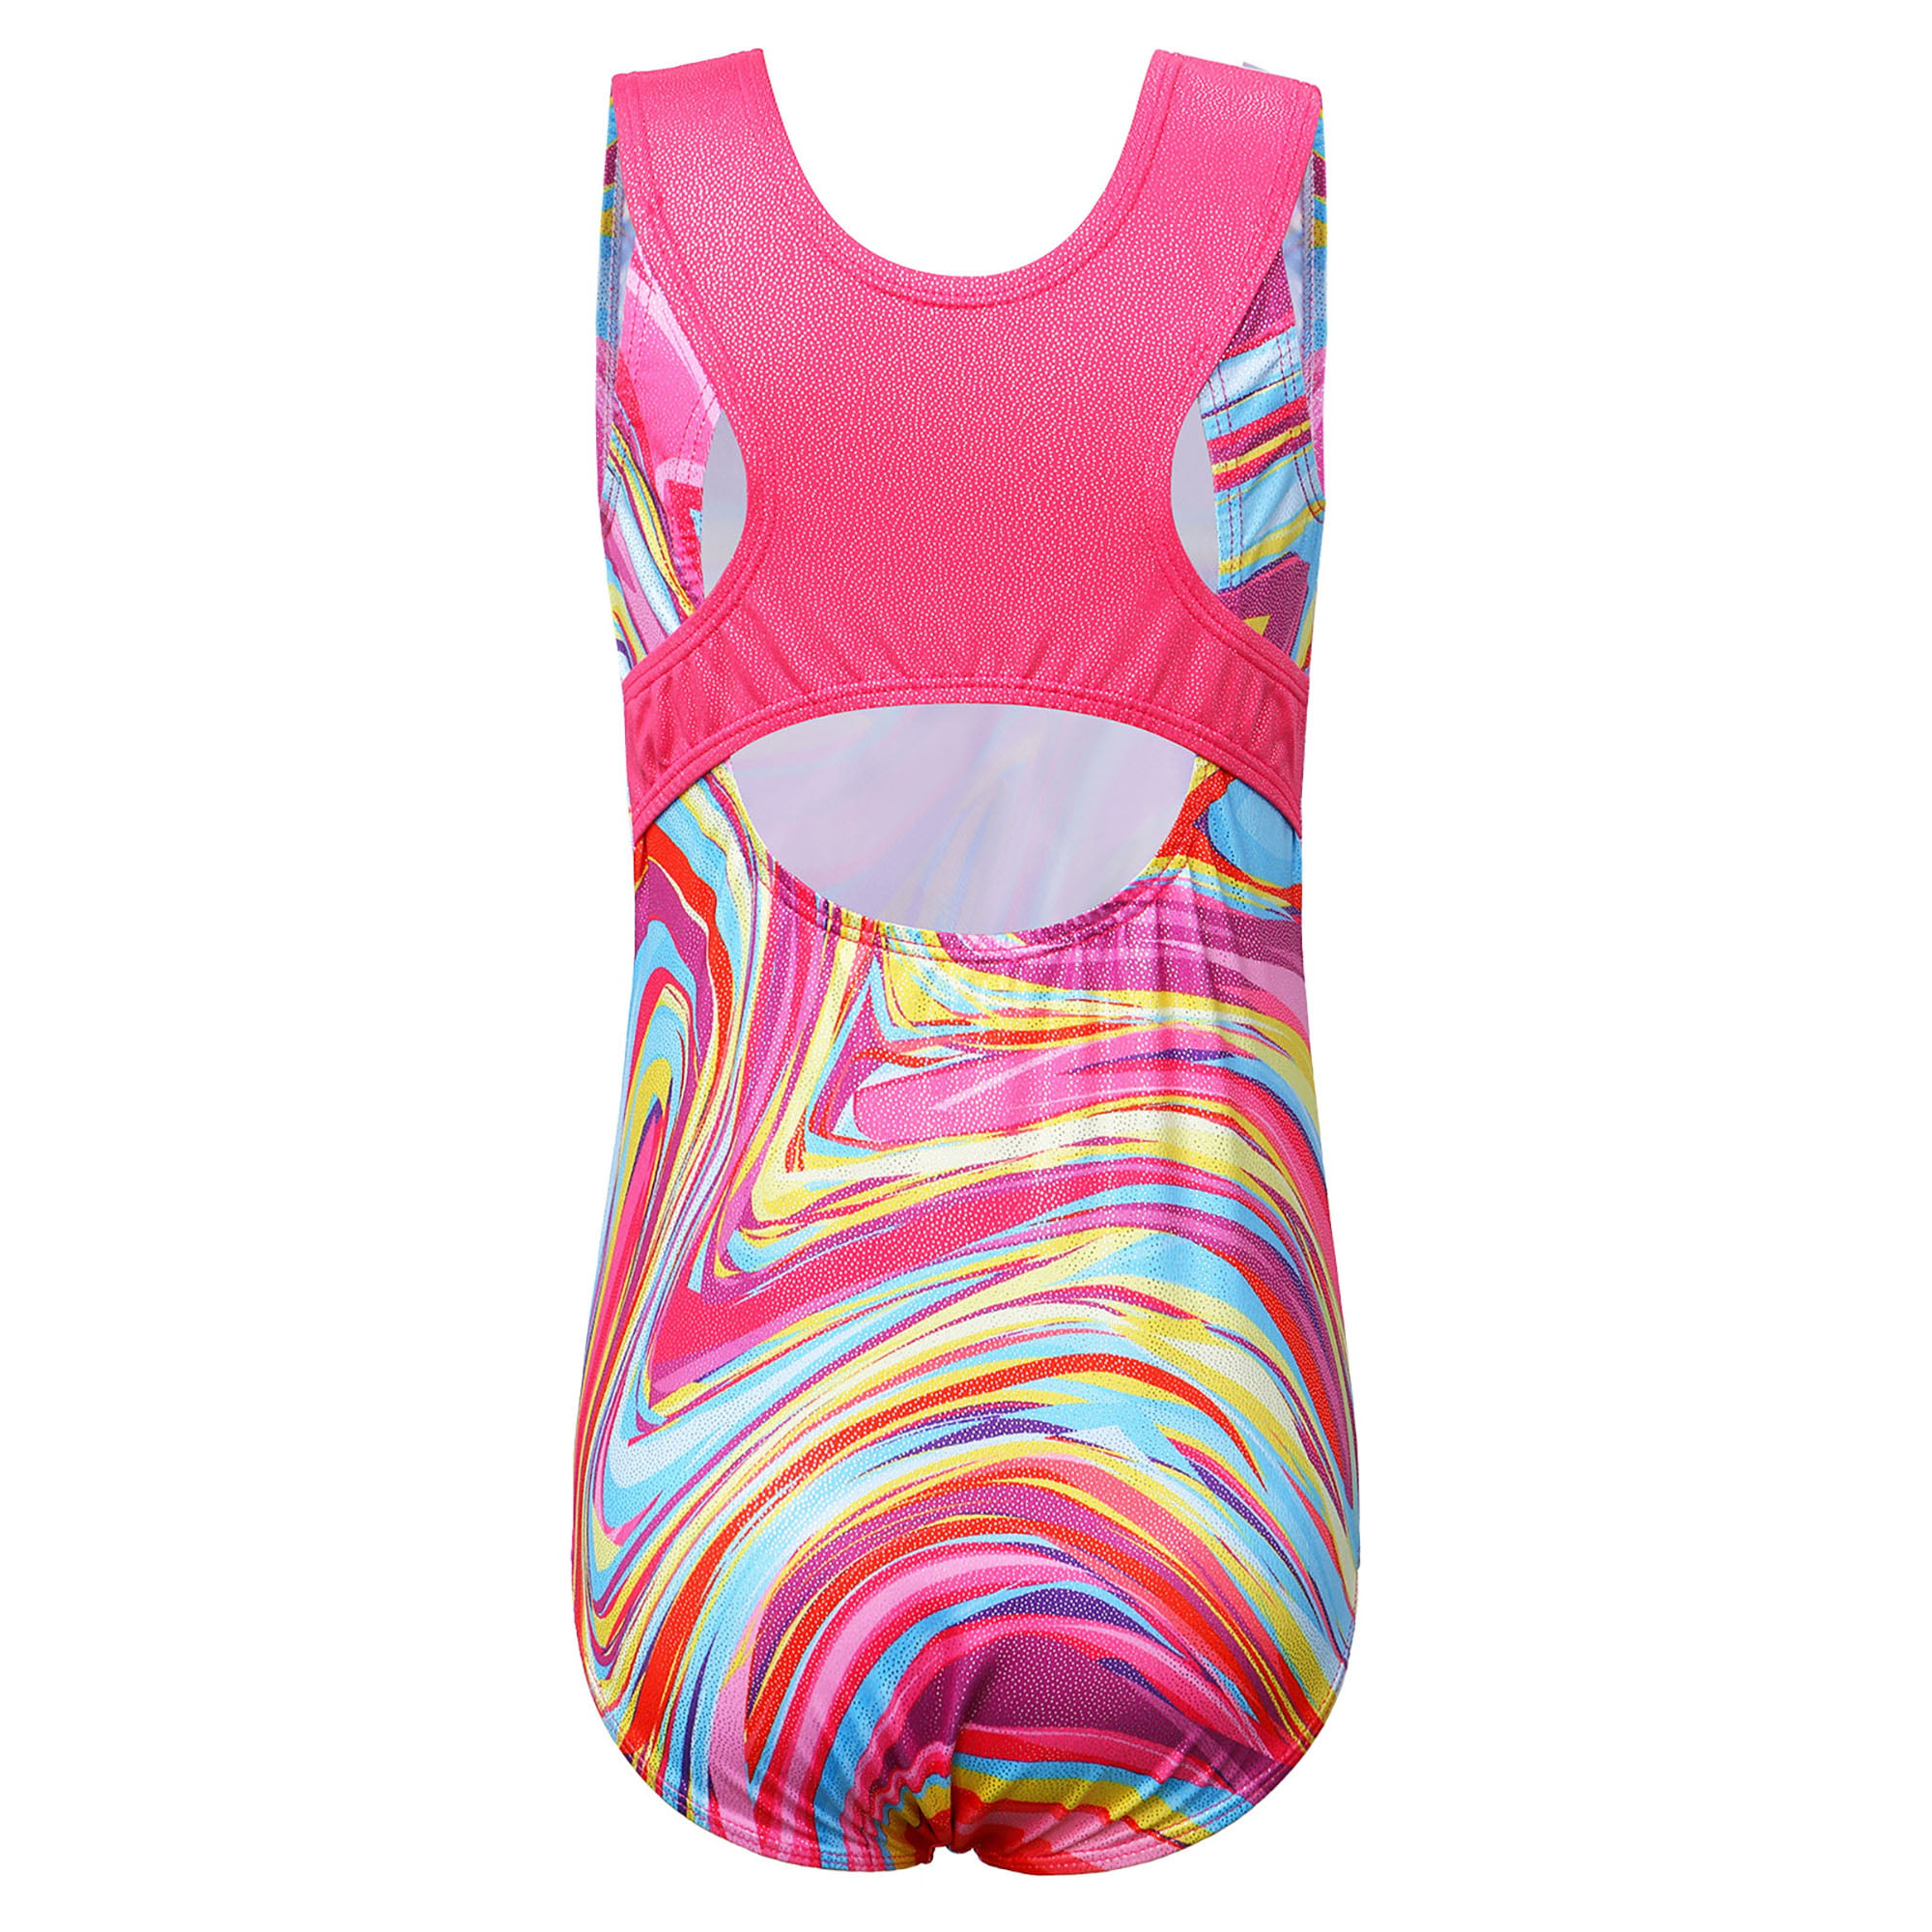 HUANQIUE Girls 3-12Y Fish Scales Sparkle Gymnastics Leotard Sleeveless 3-4Y Colorful 